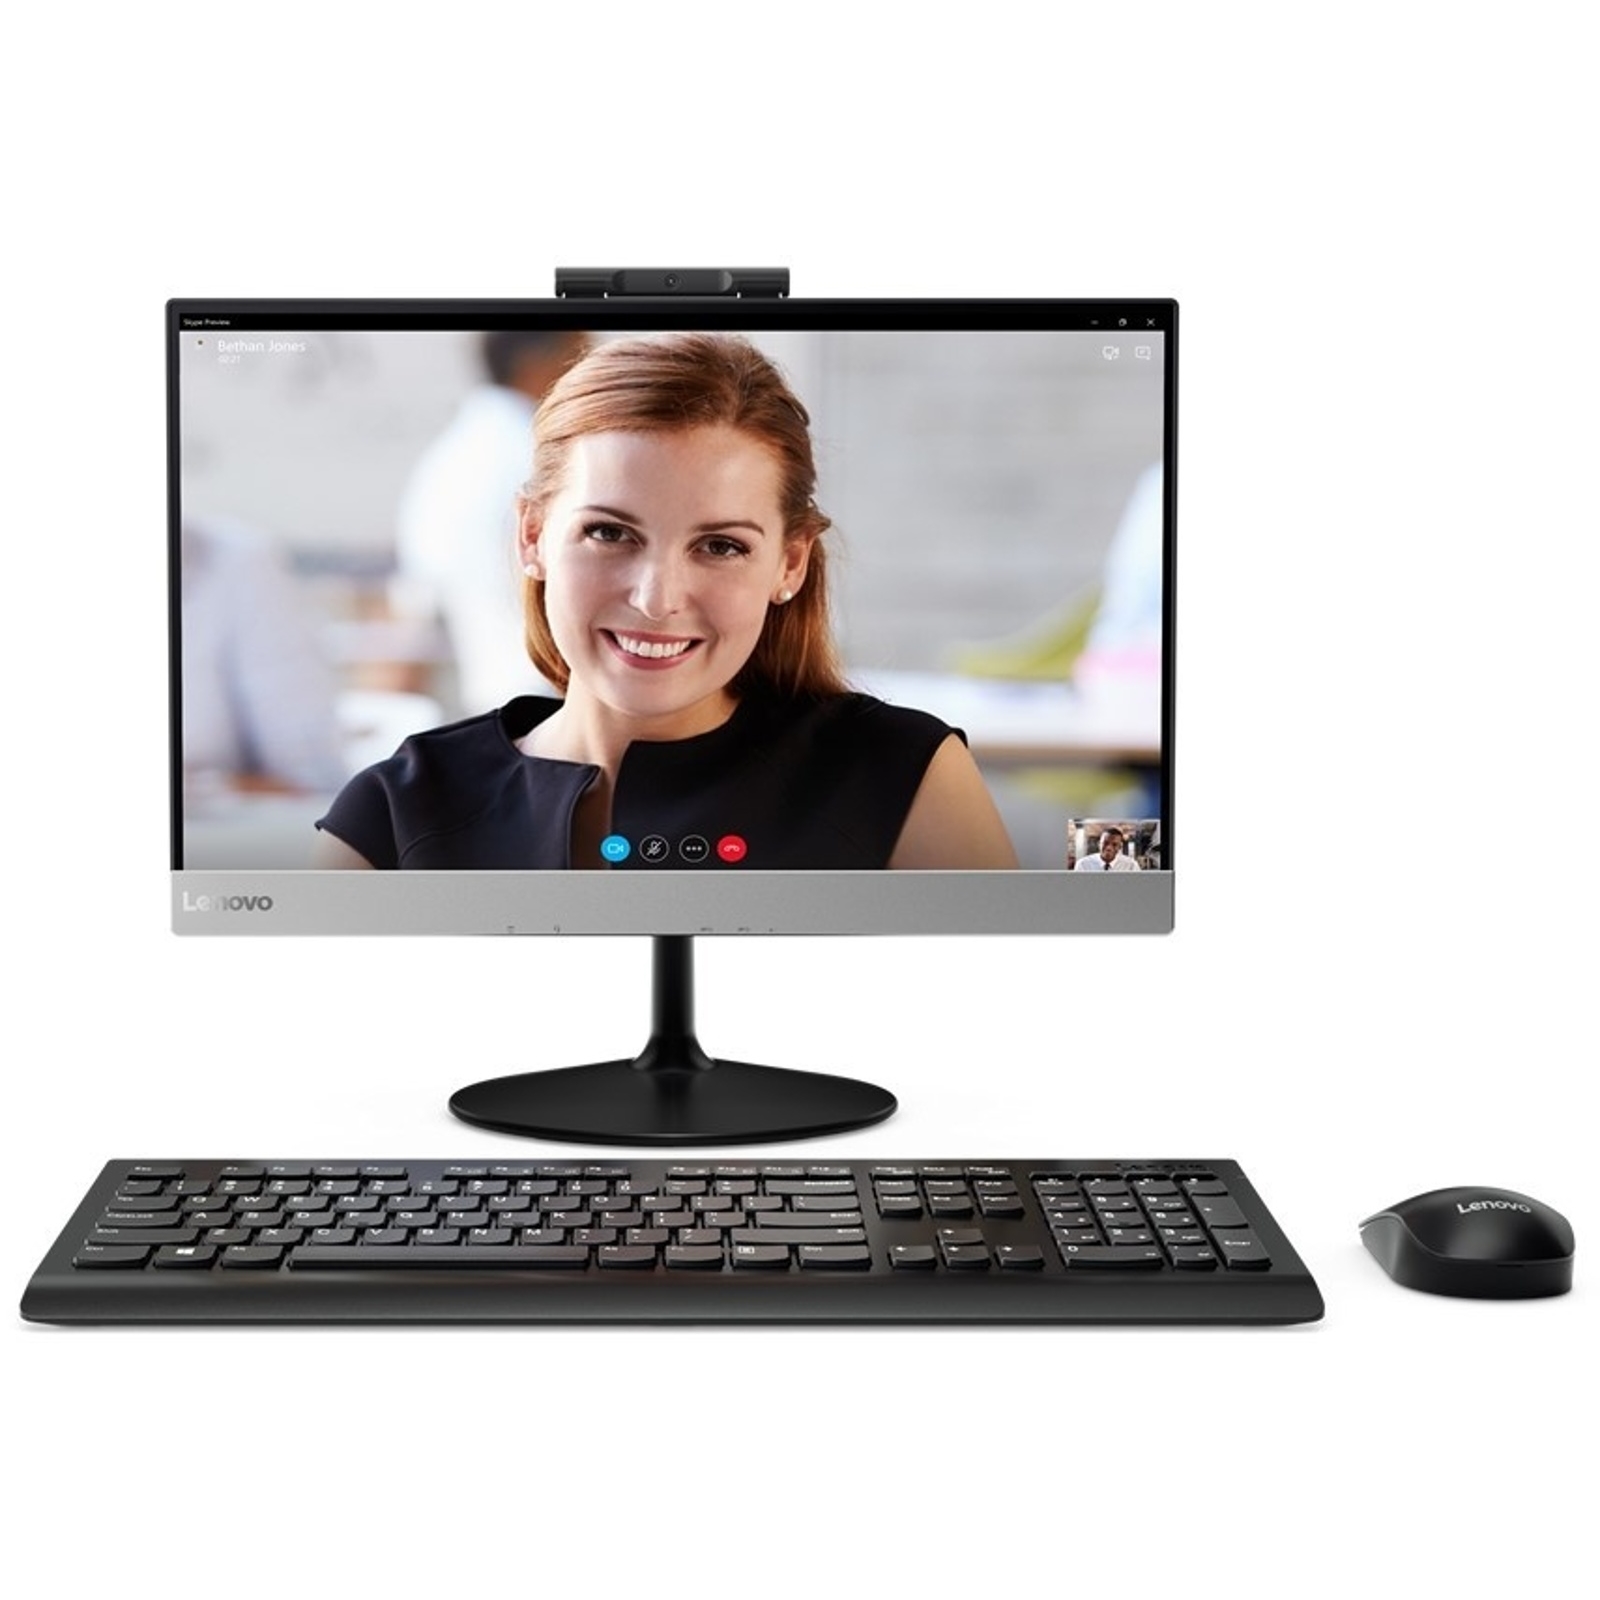 LENOVO AIO V410Z 10R5000BTX I5-7400T 4GB 500GB 2GB AMD R530 21.5" FHD NONTOUCH FREE-DOS SIYAH ALL IN ONE PC